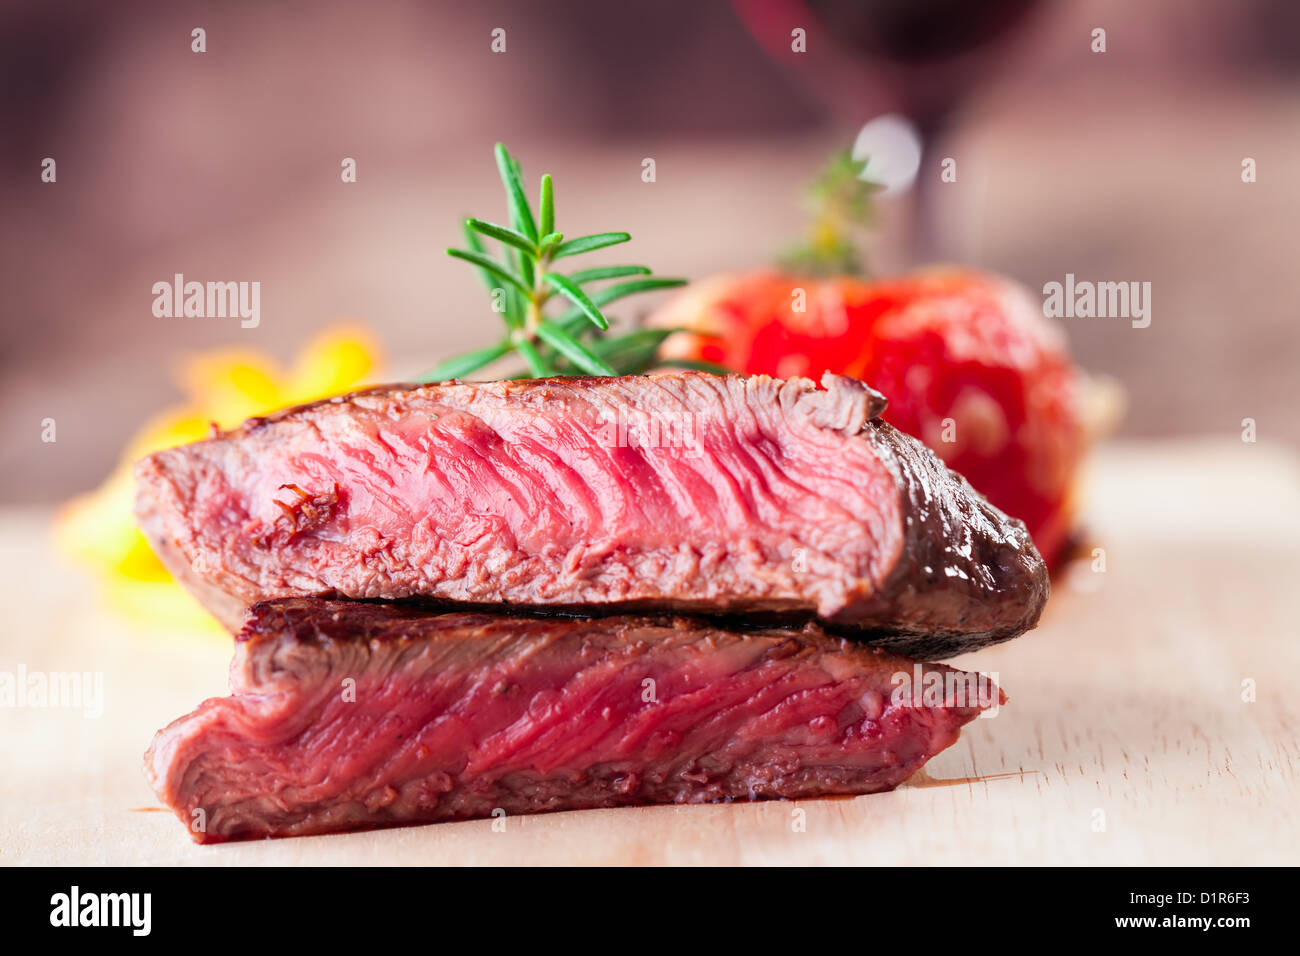 grilled steak with fries and tomato Stock Photo